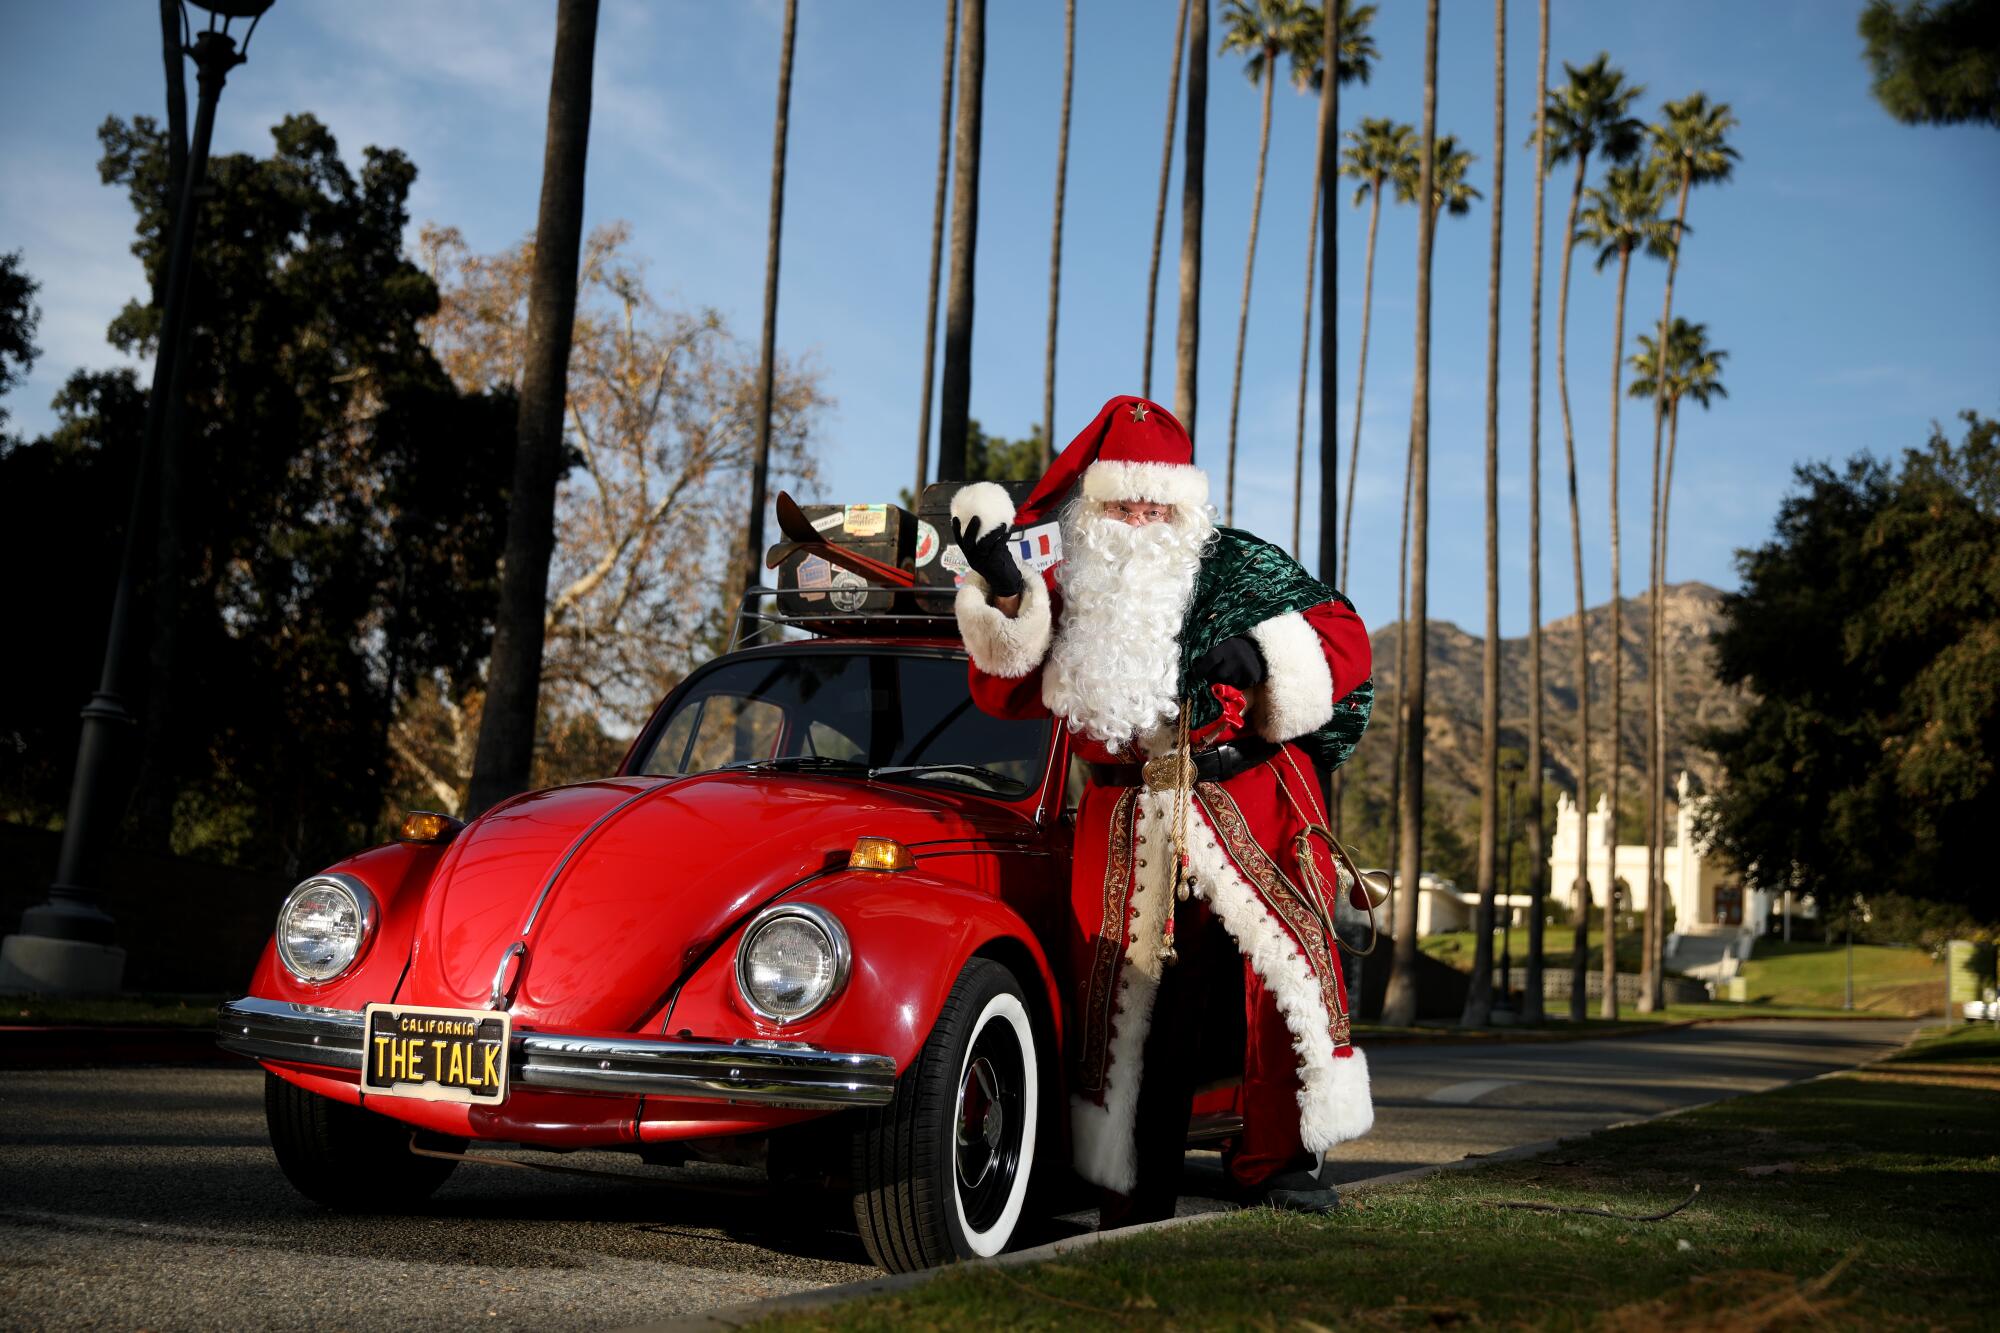 A man dressed as Santa Claus leans against a red Volkswagen Beetle car.